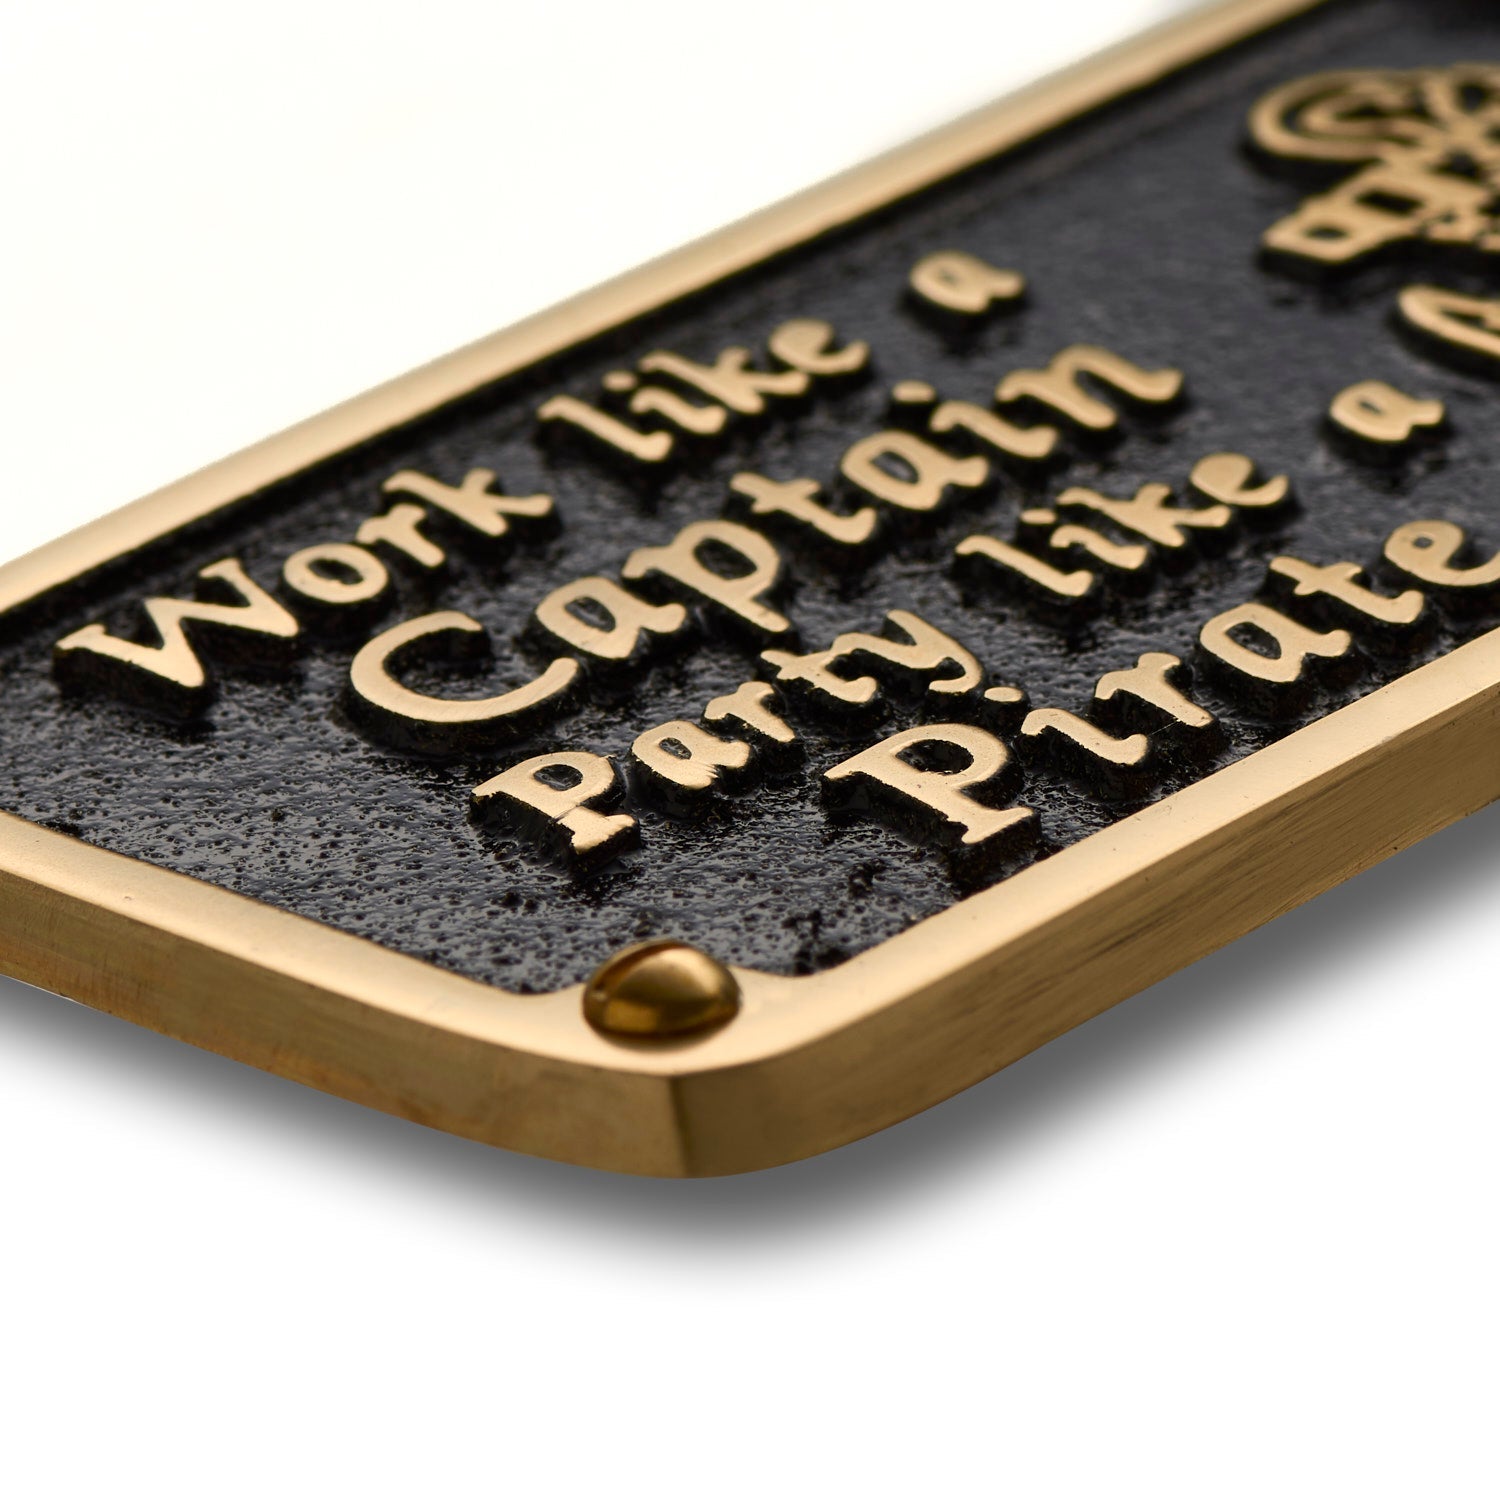 Nautical 'Party Like A Pirate' Sign - The Metal Foundry